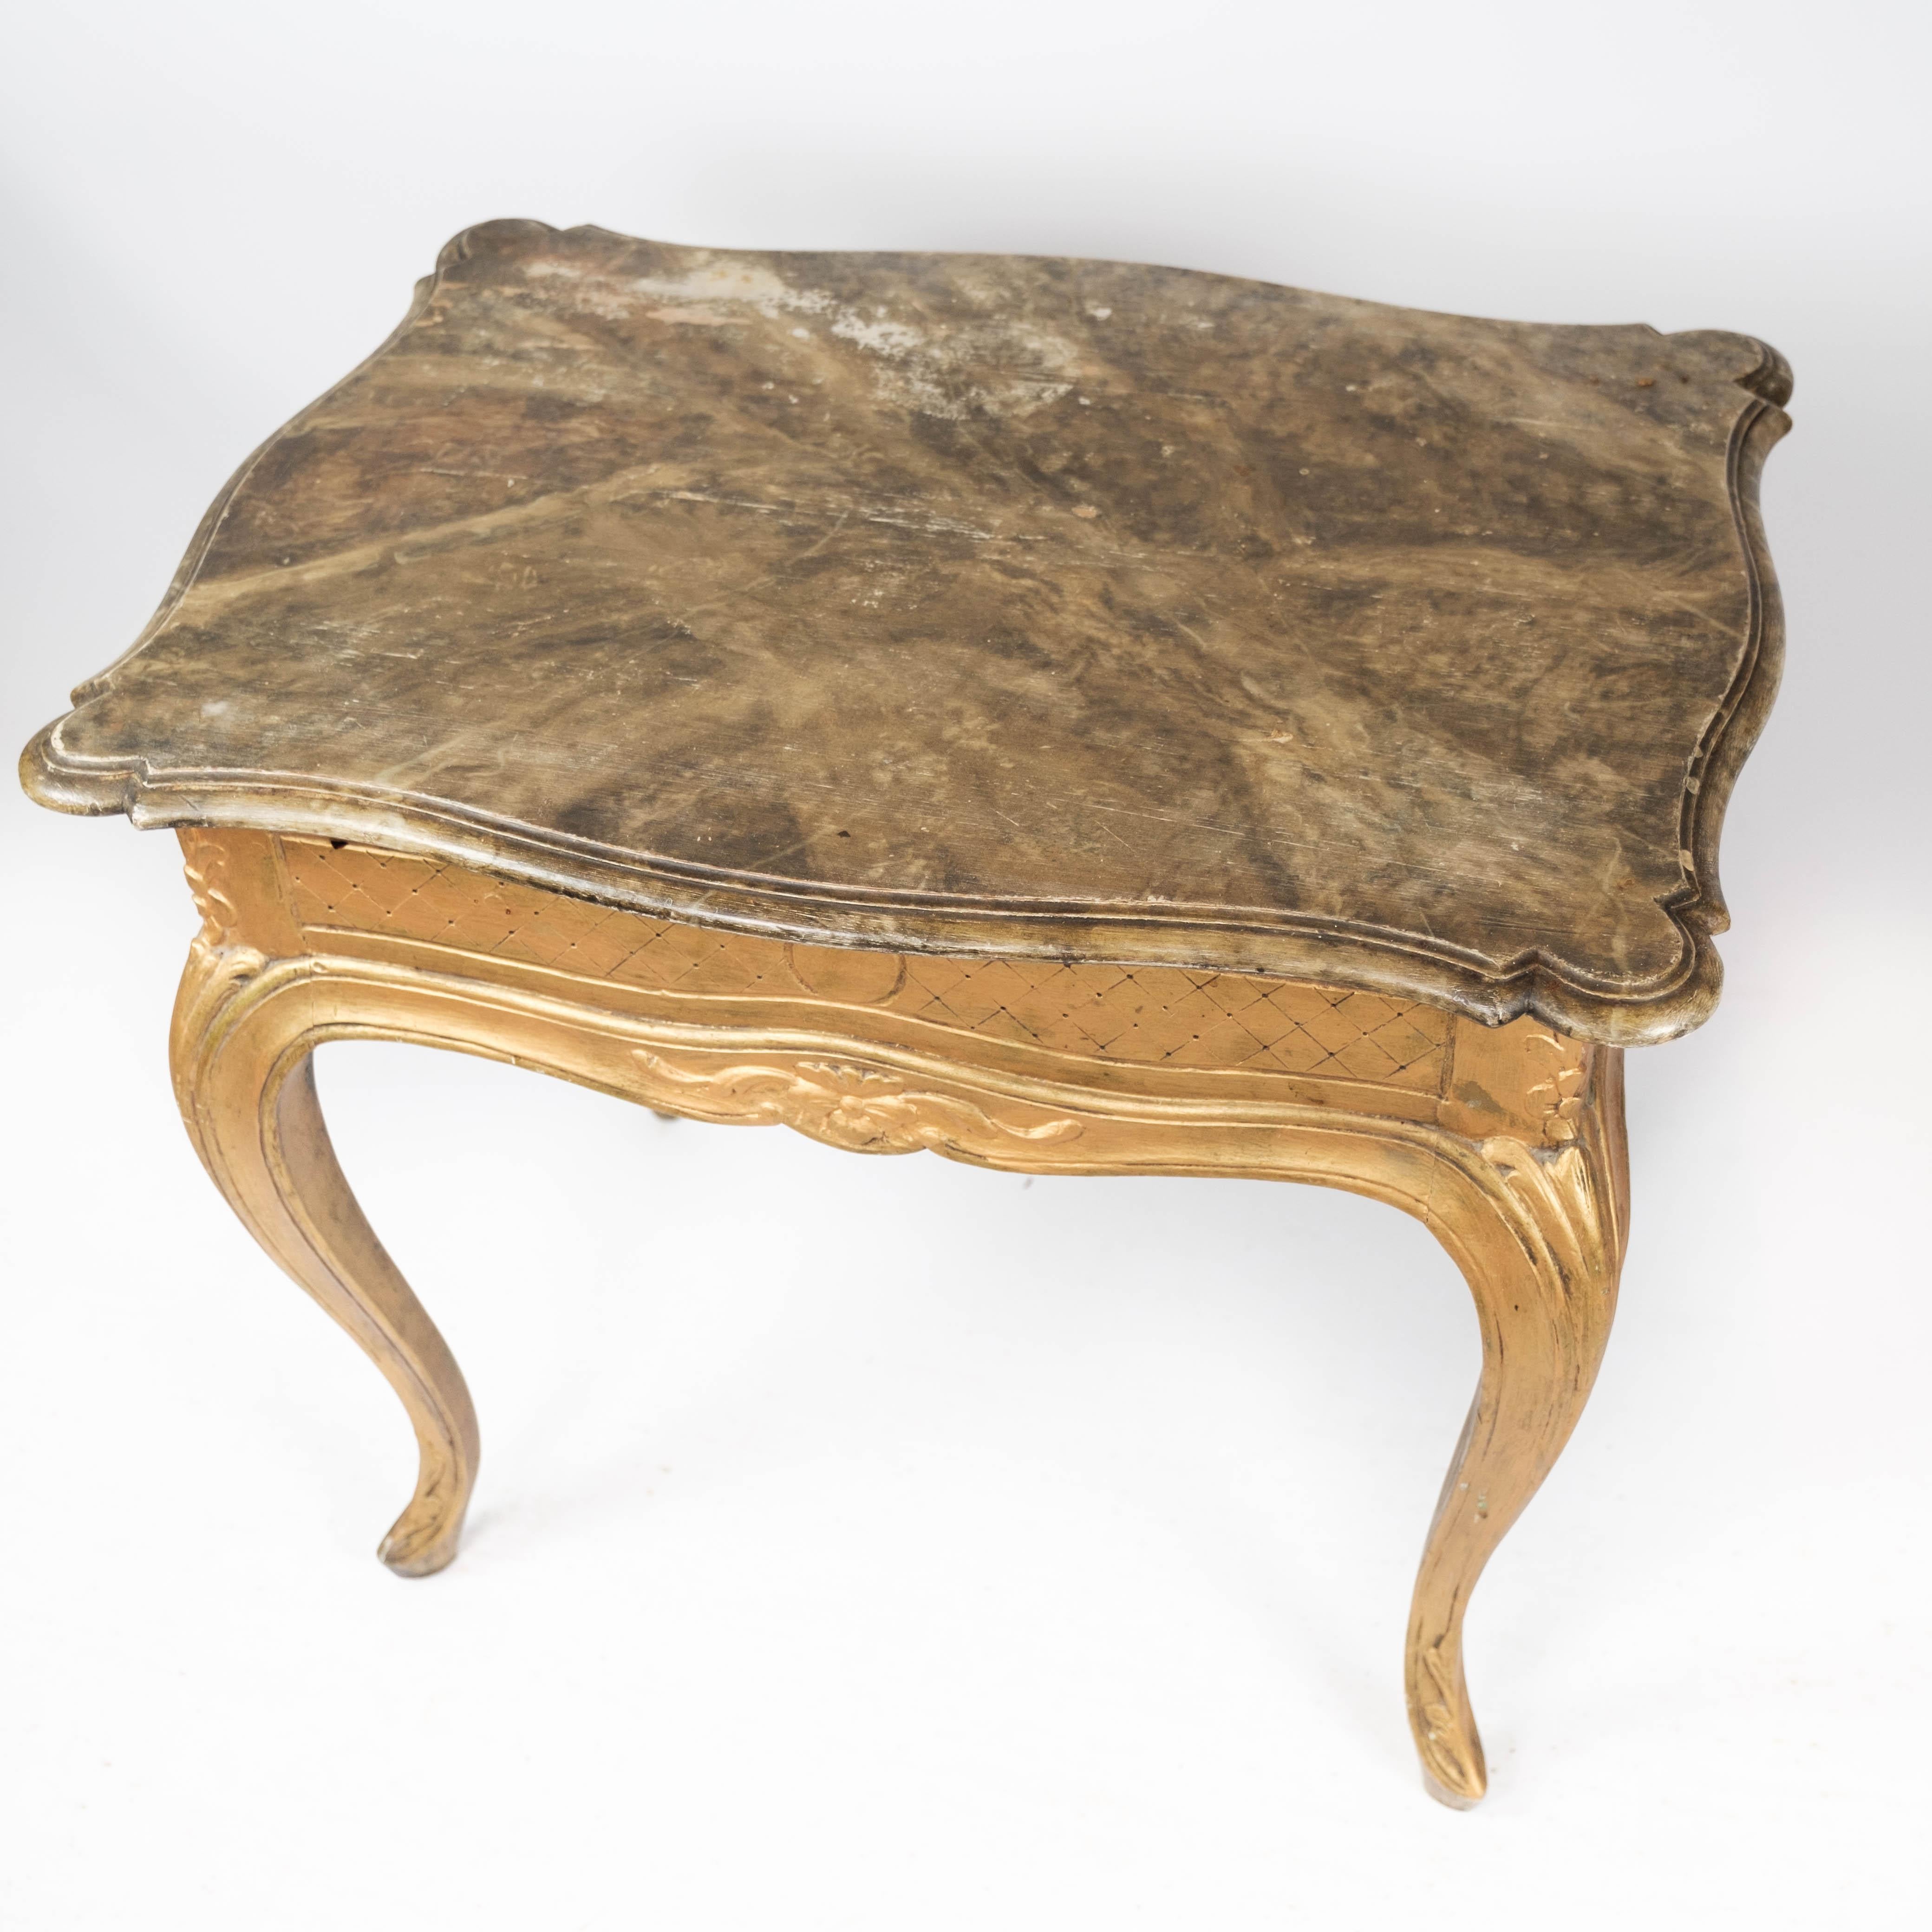 Danish Rococo Revival Side Table with Marbled Tabletop and Frame of Gilded Wood, 1860s For Sale